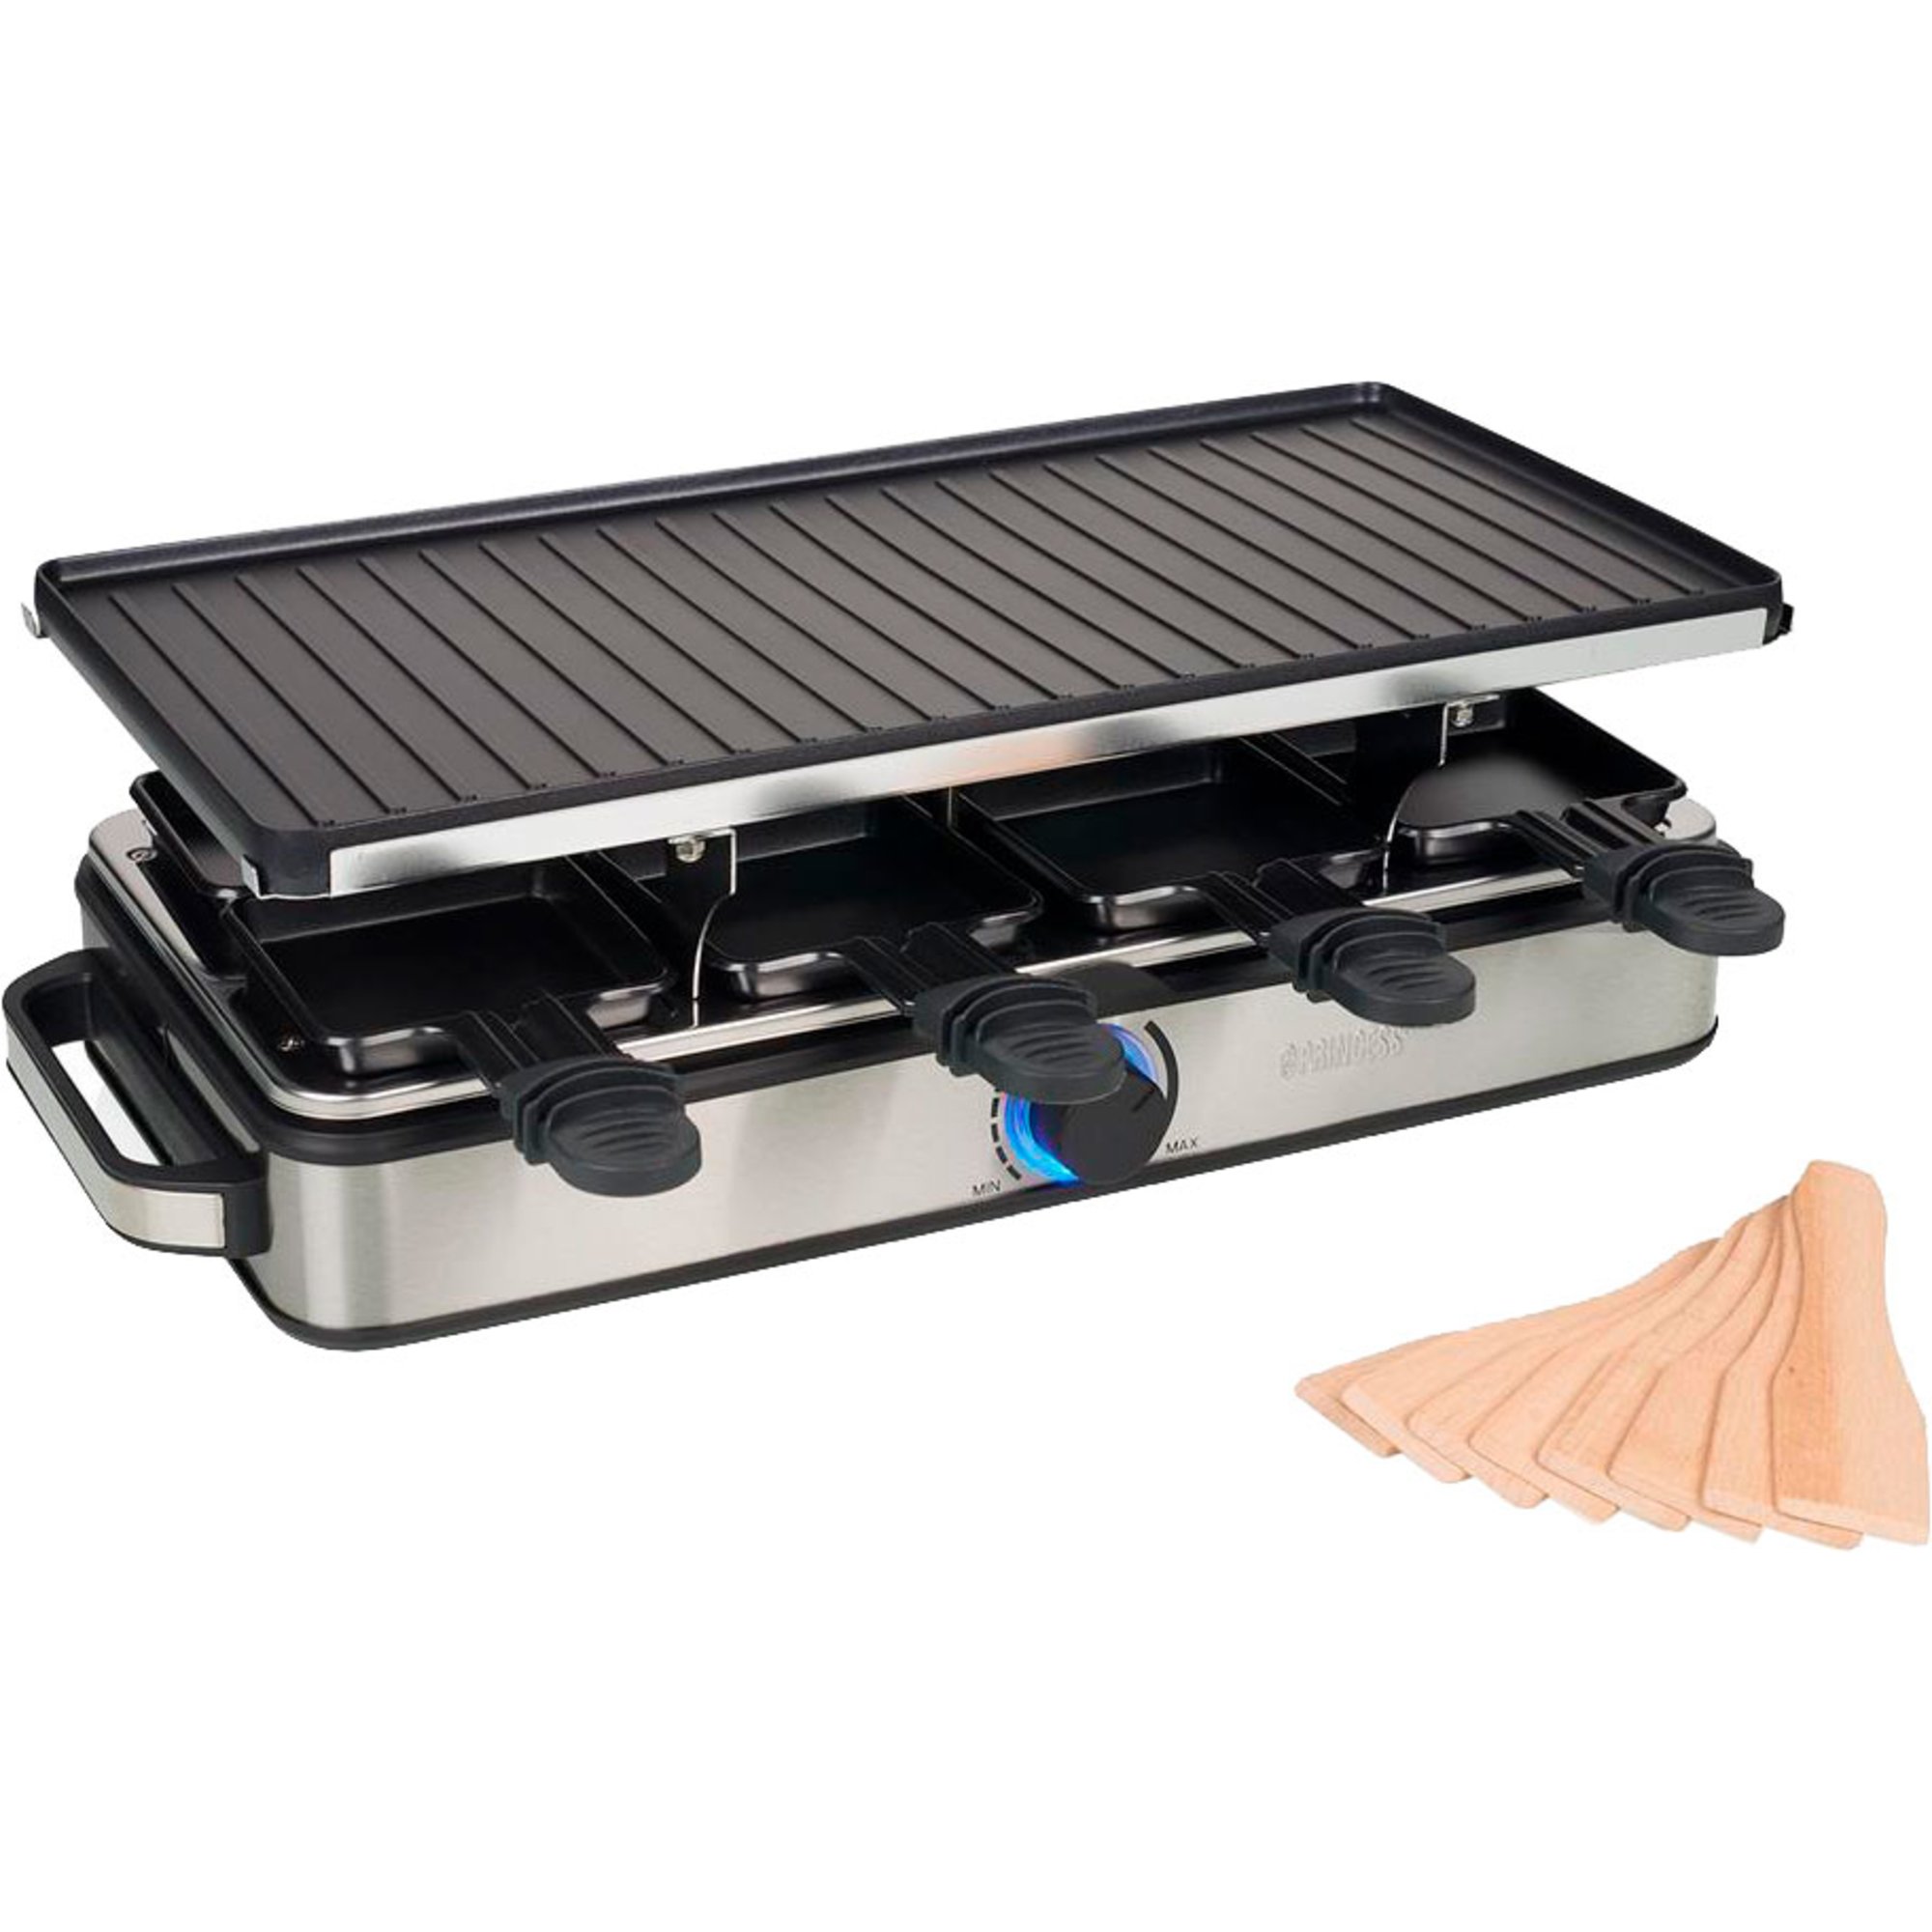 11: Princess Grill Deluxe Raclette, 8 personer